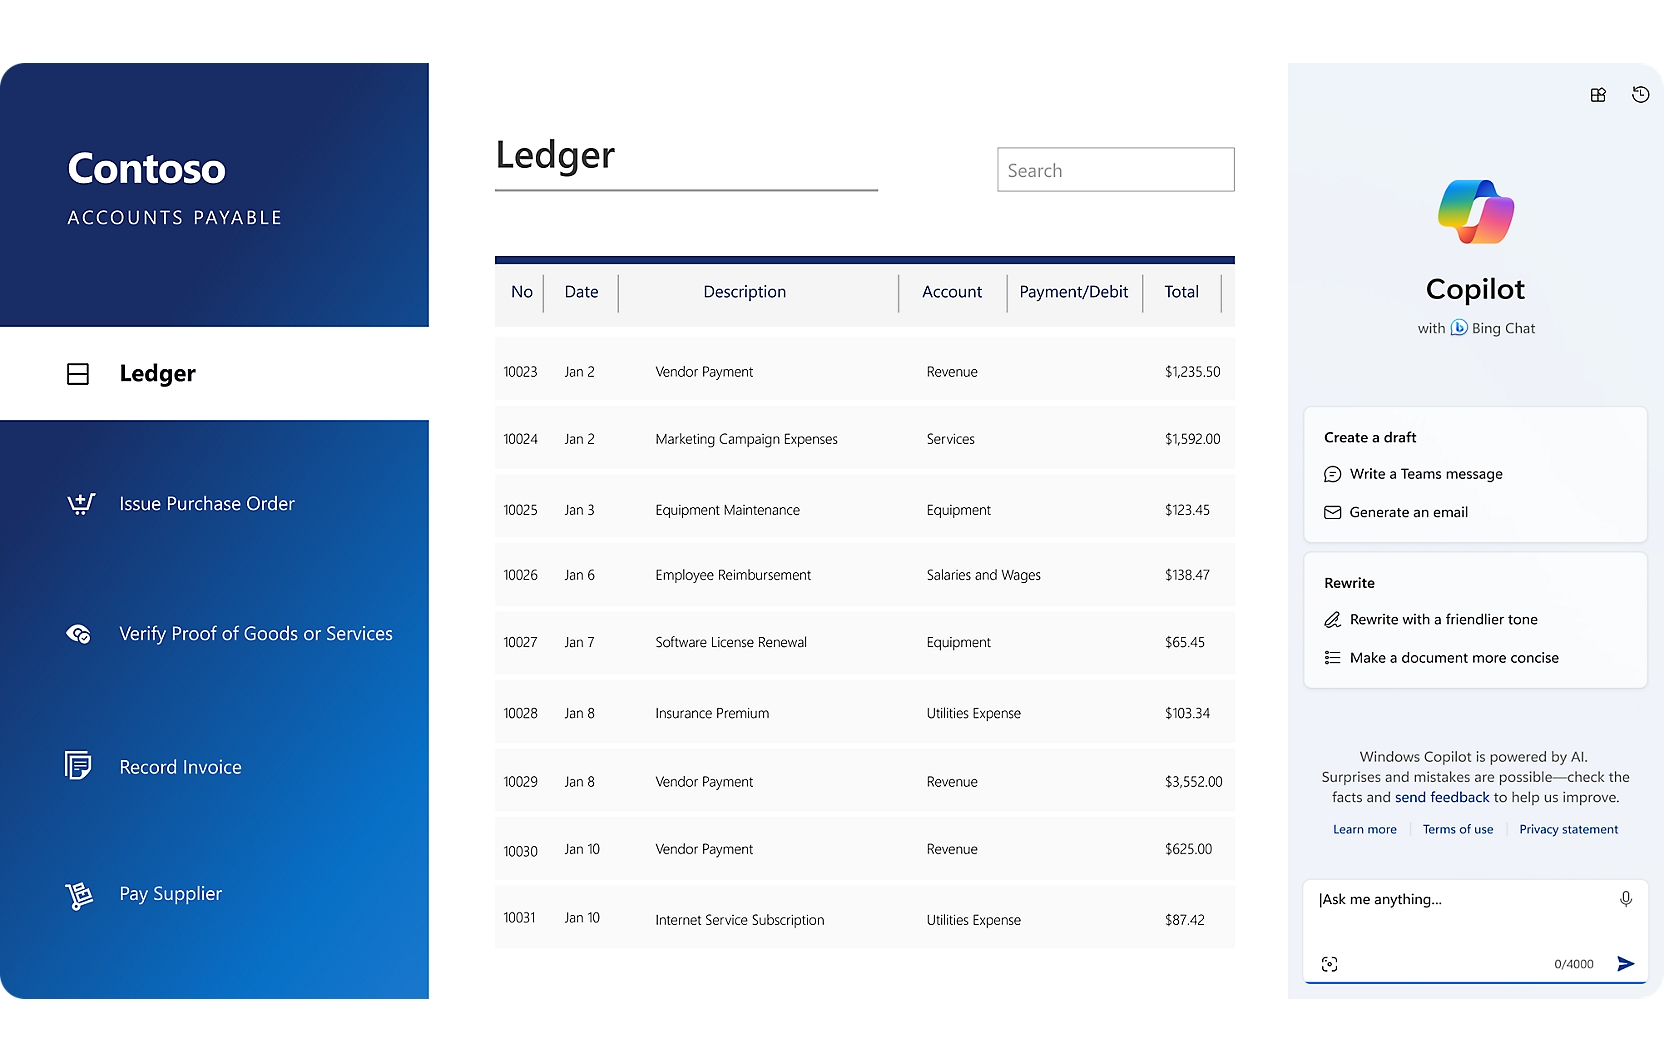 Window showing Contoso Ledger in list view.